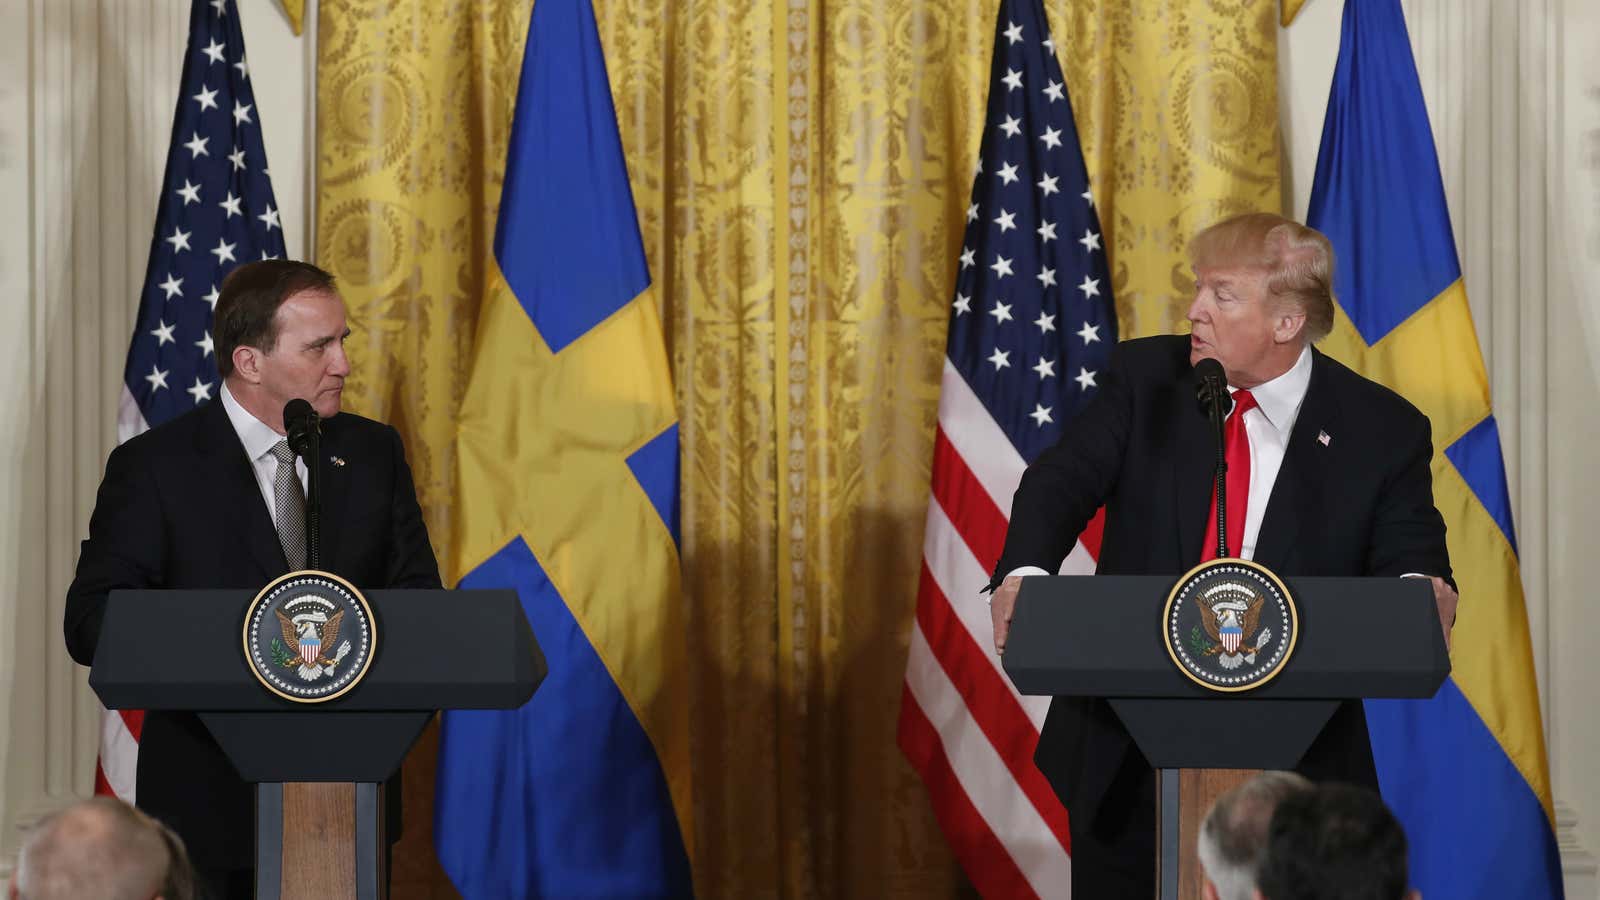 Trump, for one, doesn’t think the US should be more like Sweden.